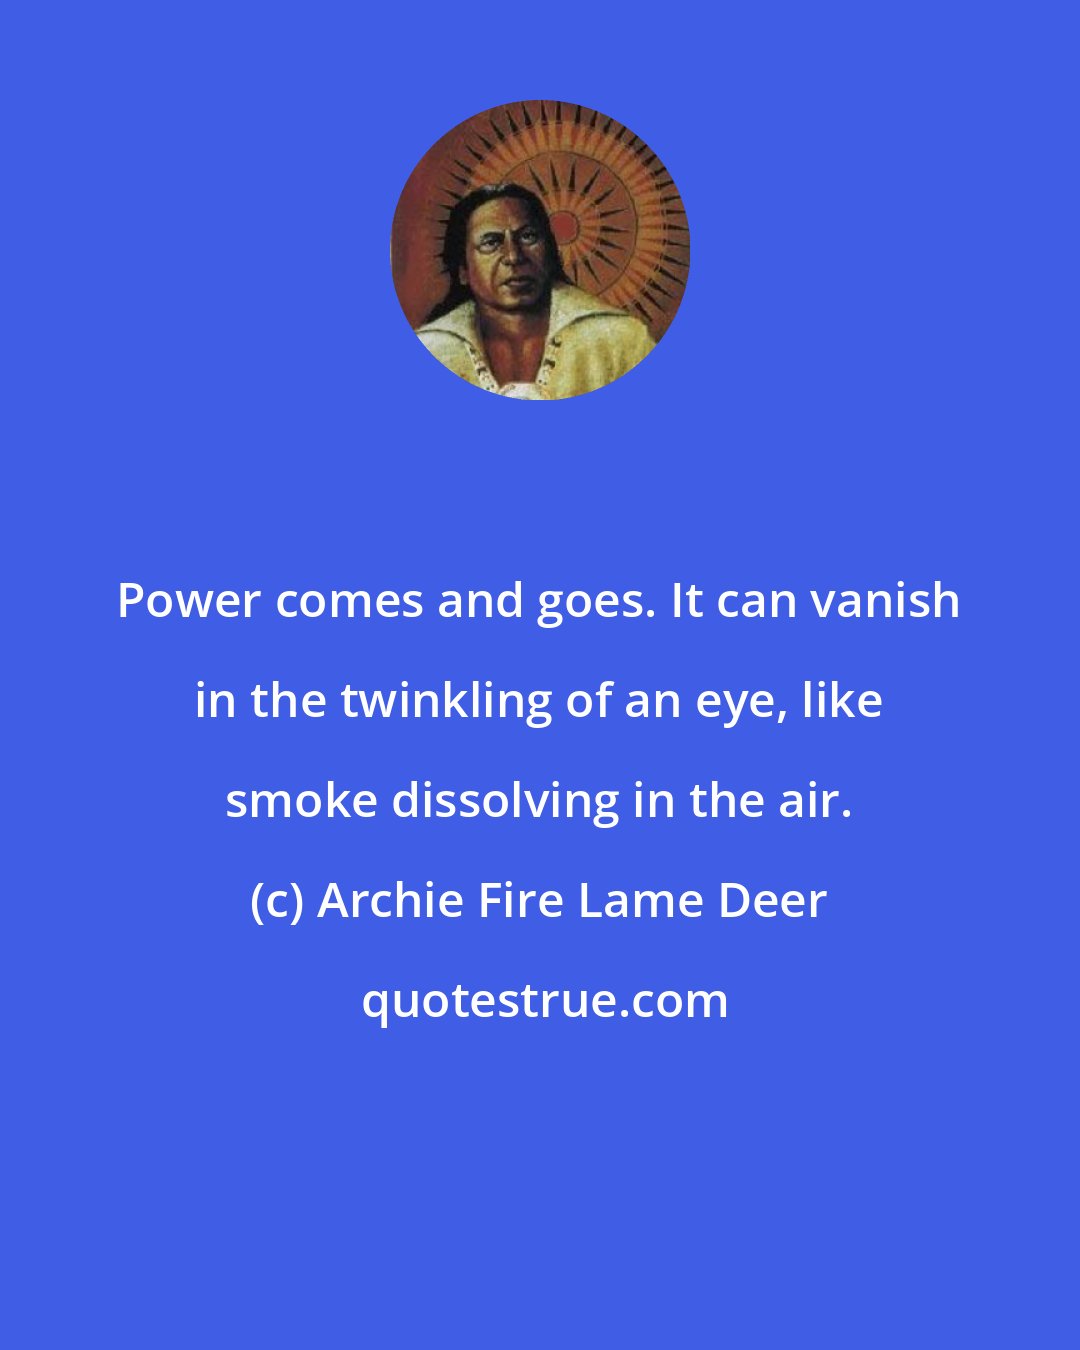 Archie Fire Lame Deer: Power comes and goes. It can vanish in the twinkling of an eye, like smoke dissolving in the air.